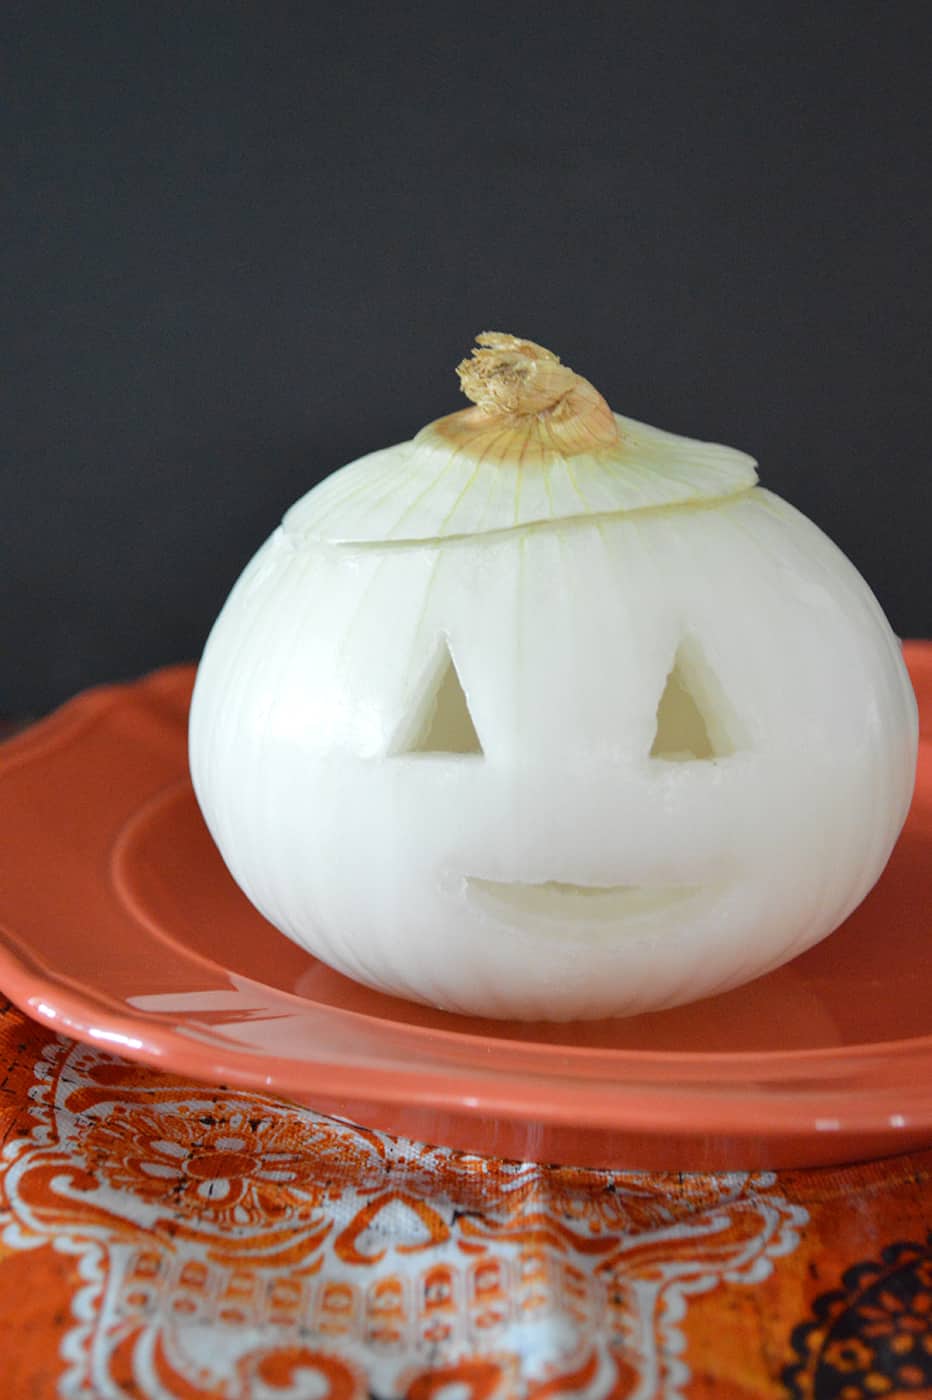 Carving an onion for Halloween